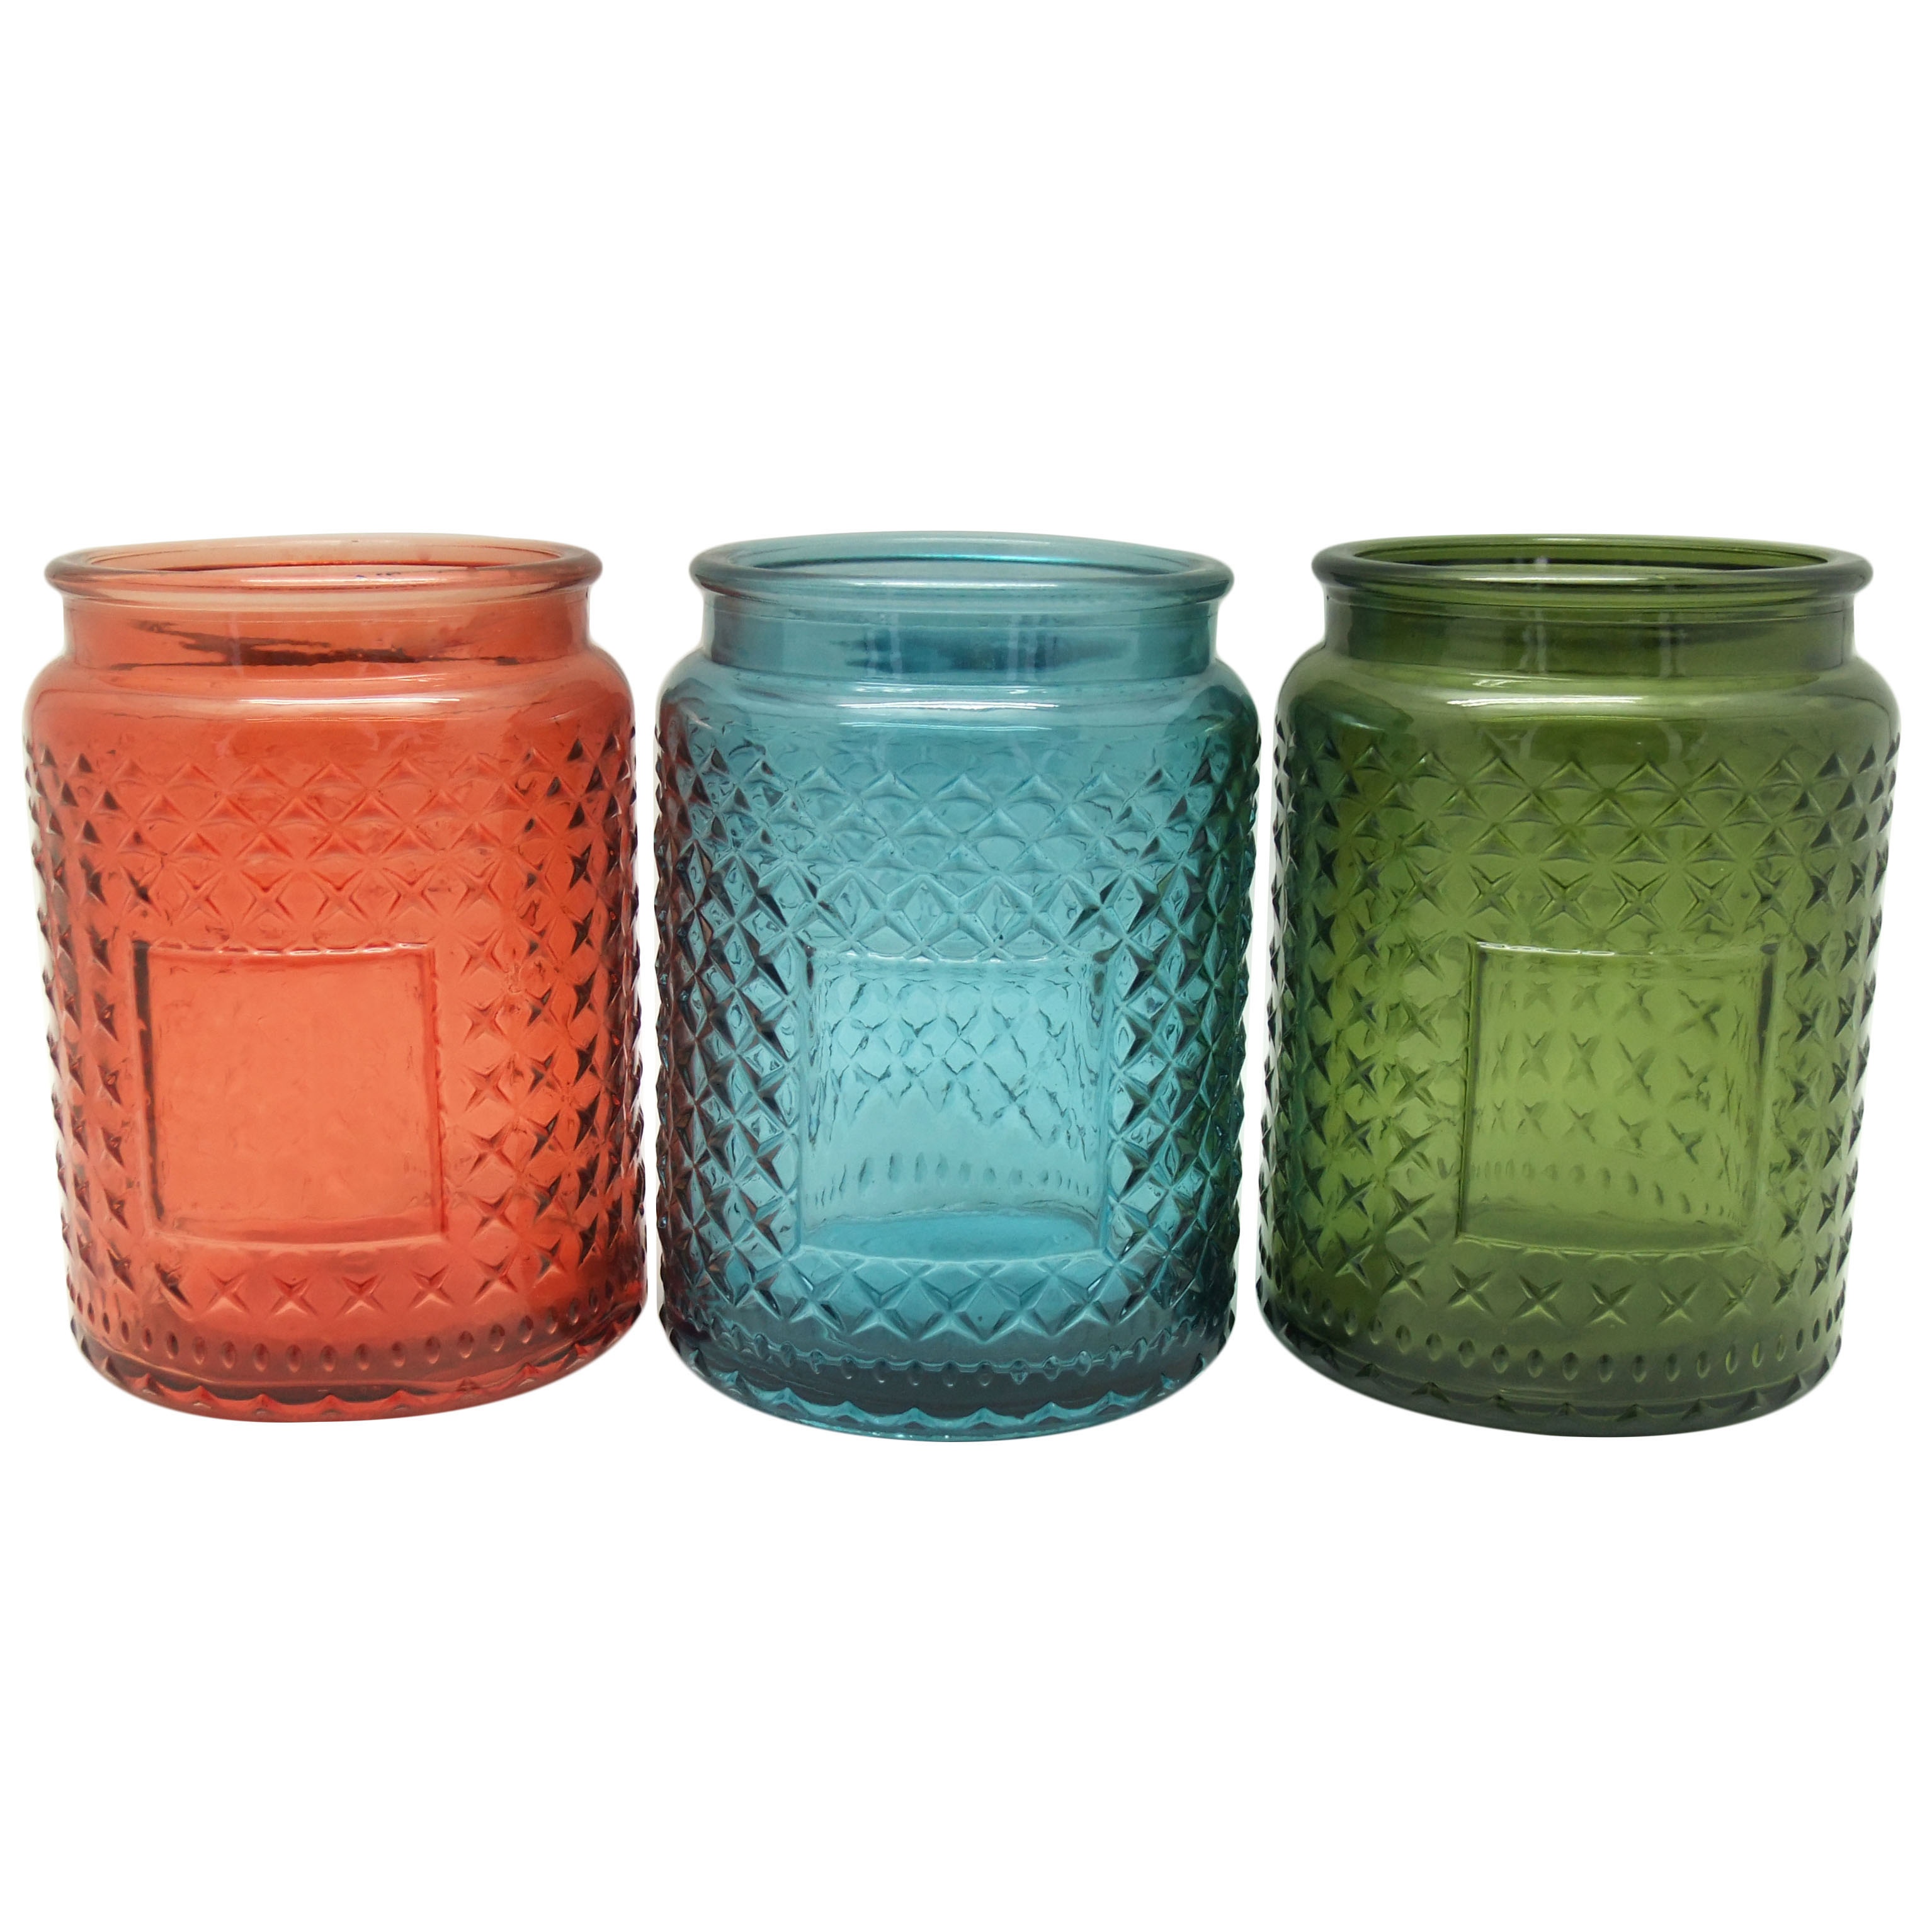 Large Embossed Glass Jar Candle 17oz Unique Candle Jars With Screw Top  Metal Lids Candle Holders 18oz Stars Facets, High Quality Large Glass Jar  With Screw Top Lid,Large Embossed Glass Jar,Candle Jar